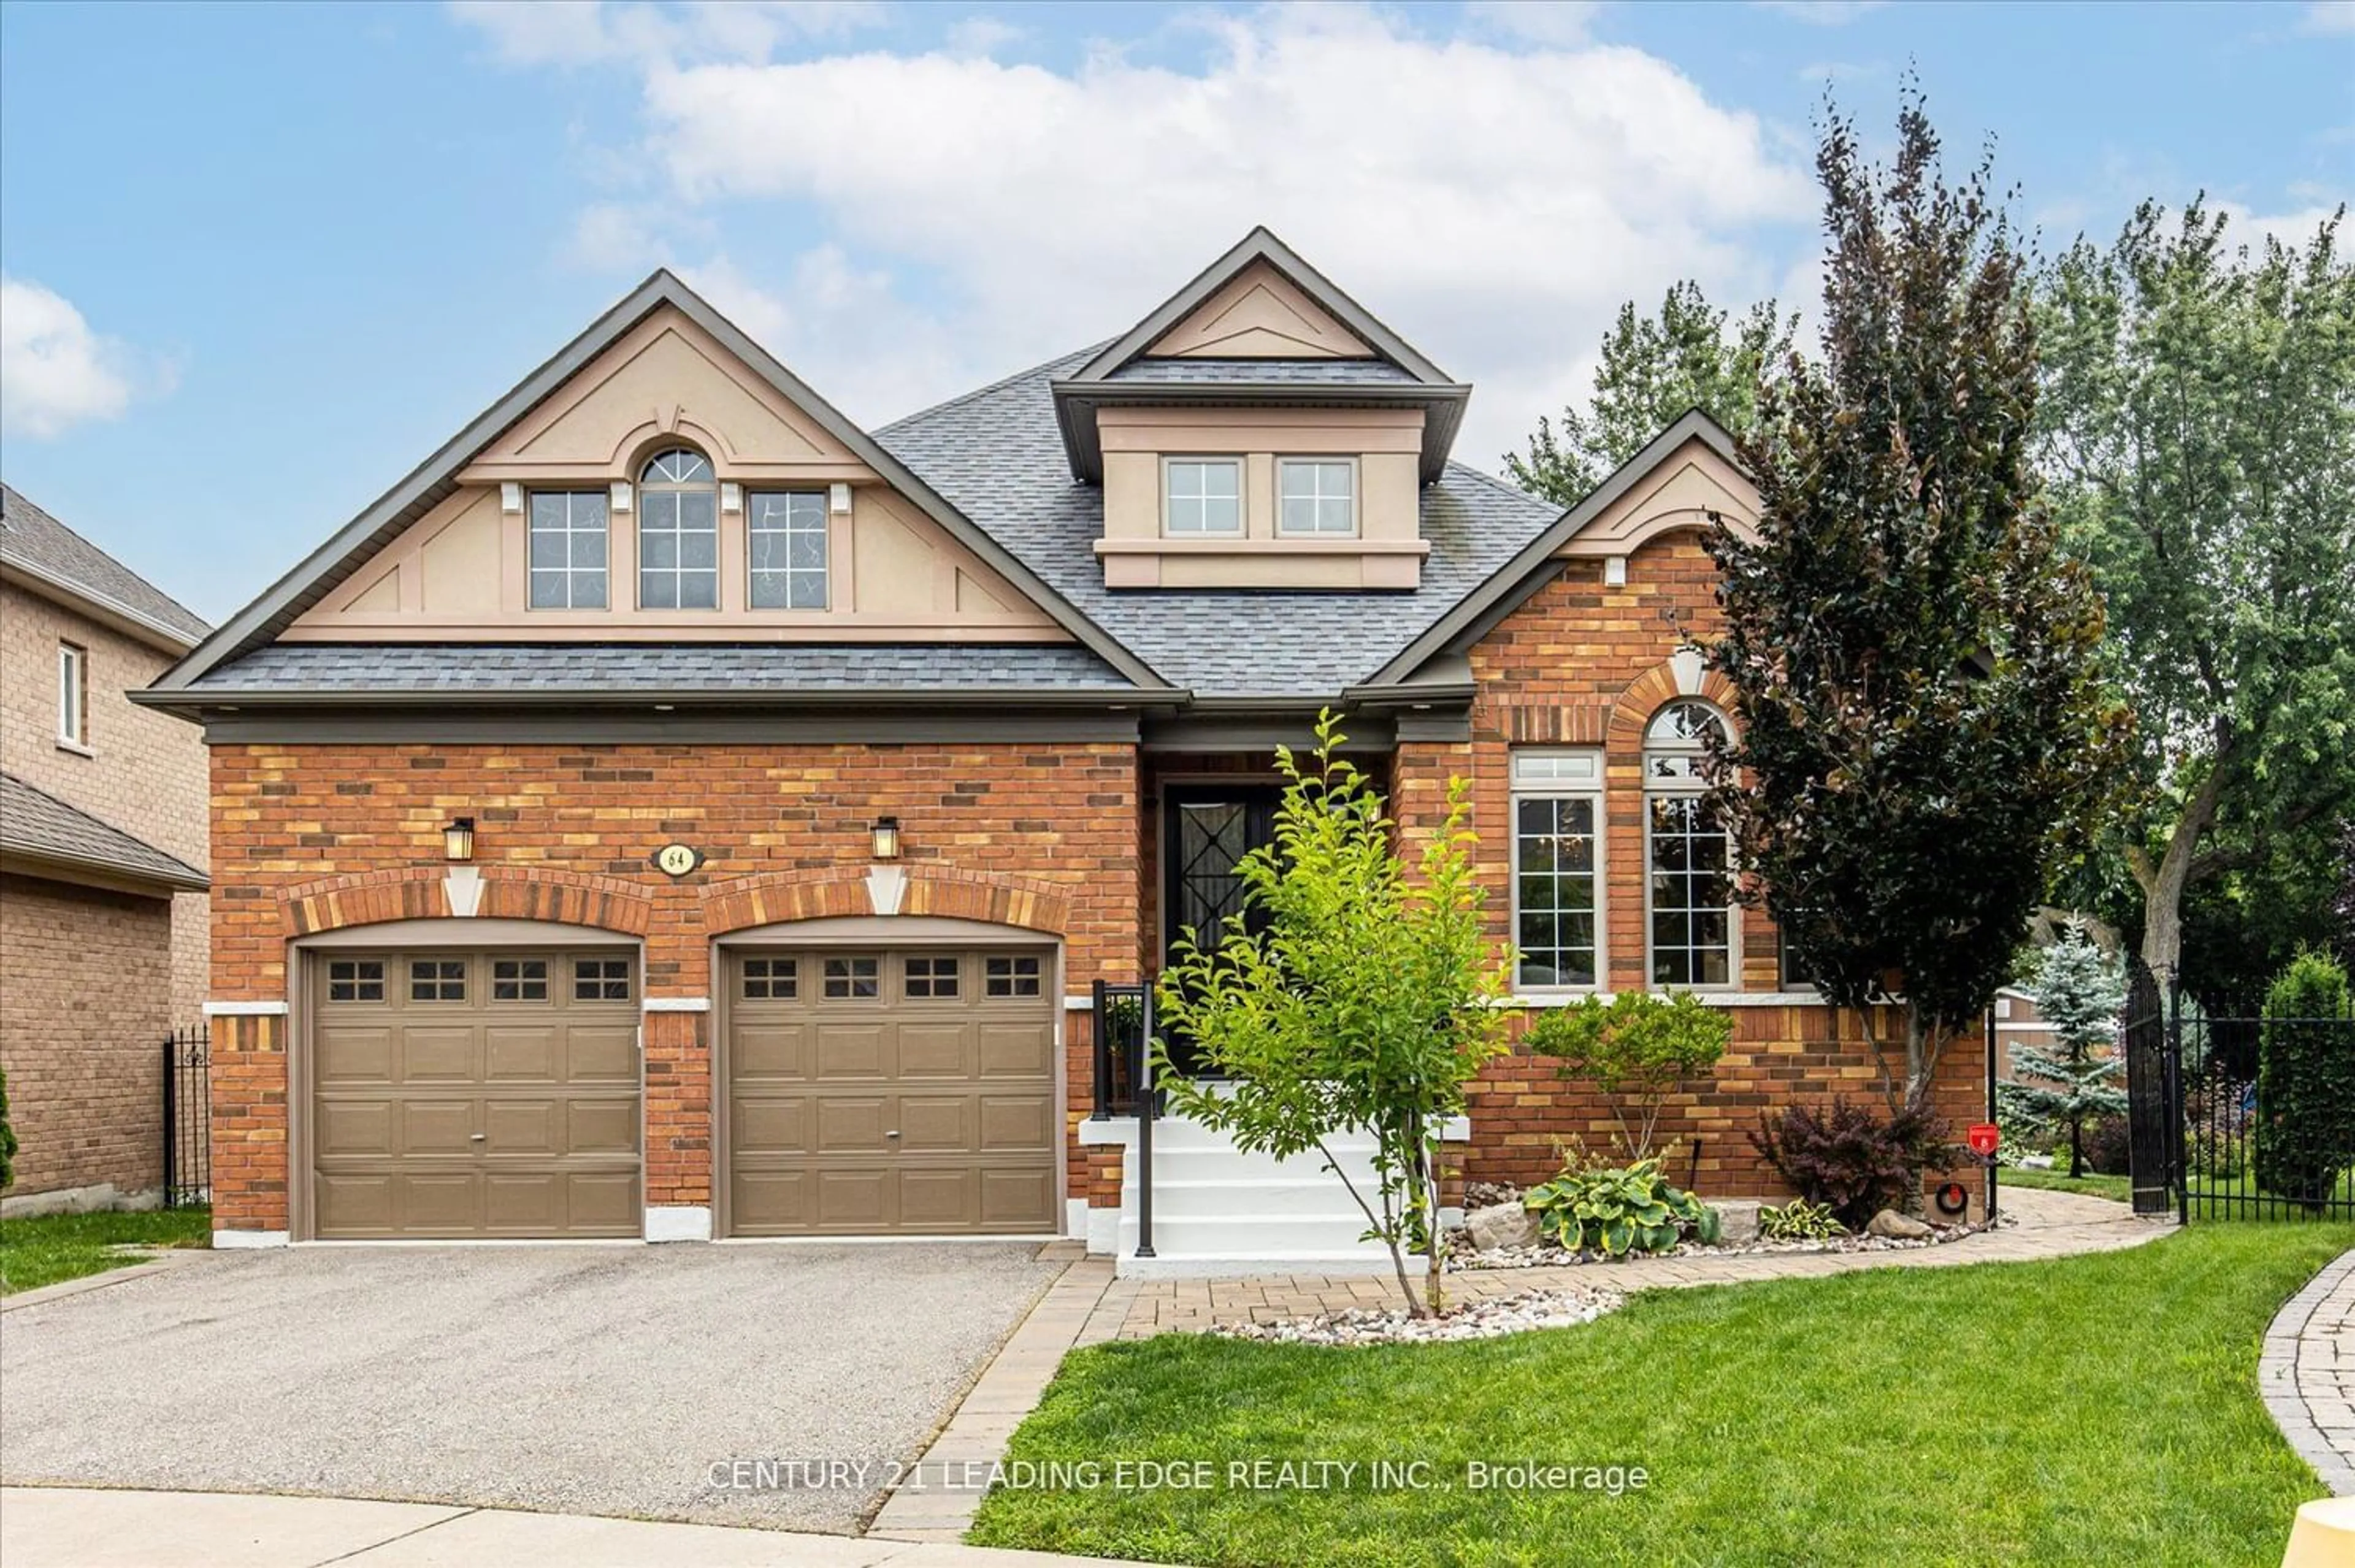 Home with brick exterior material for 64 Miles Hill Cres, Richmond Hill Ontario L4E 4Y9